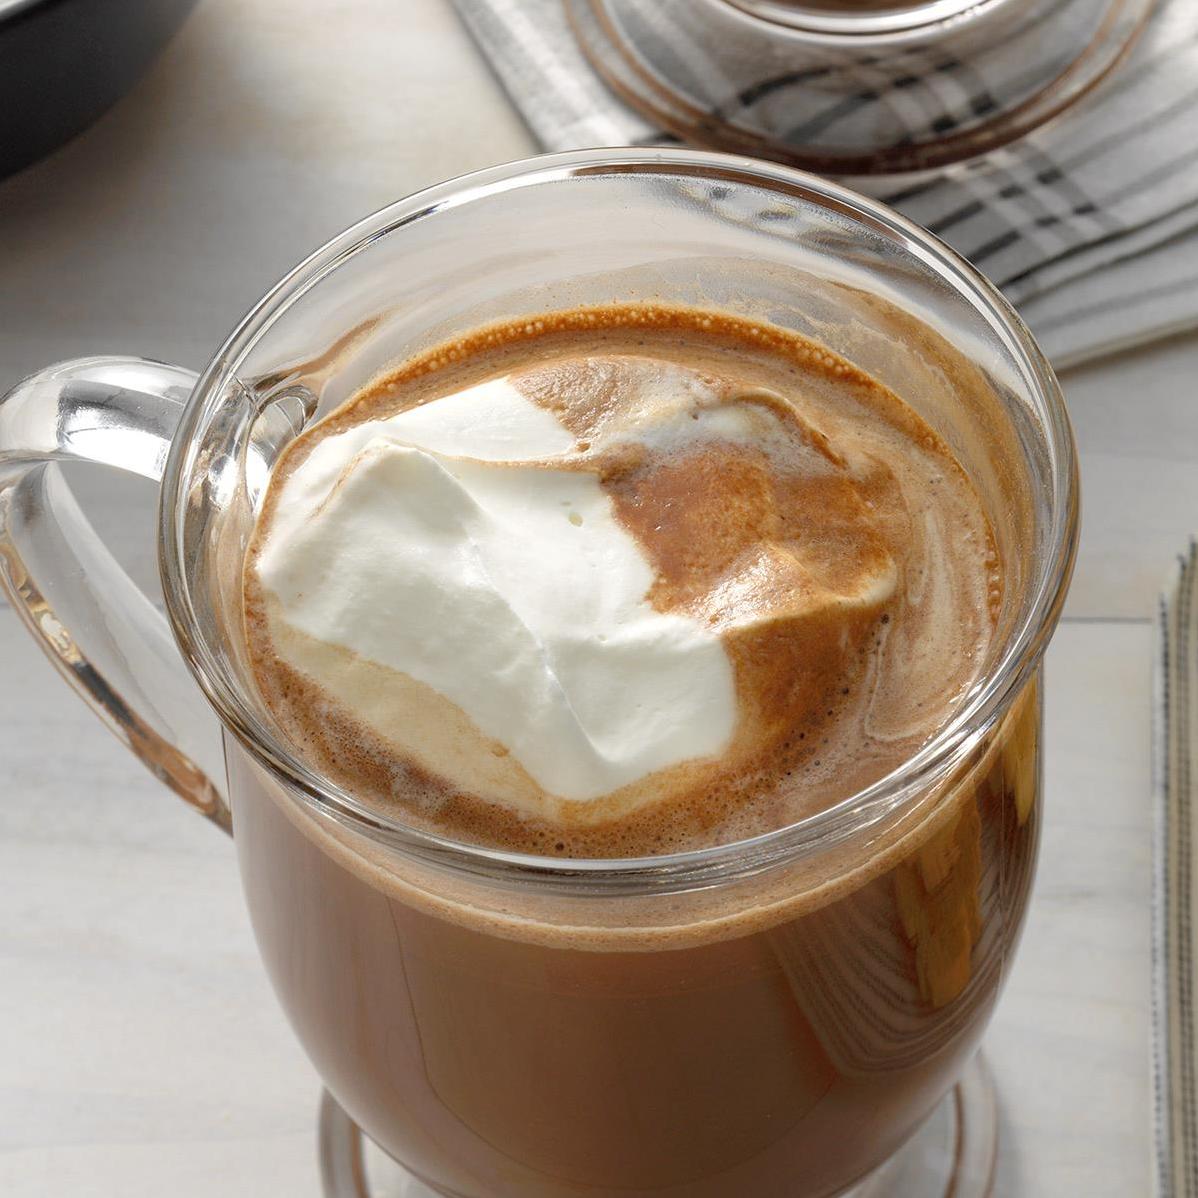  Enjoy aromas of coffee and chocolate with each sip of this beverage.